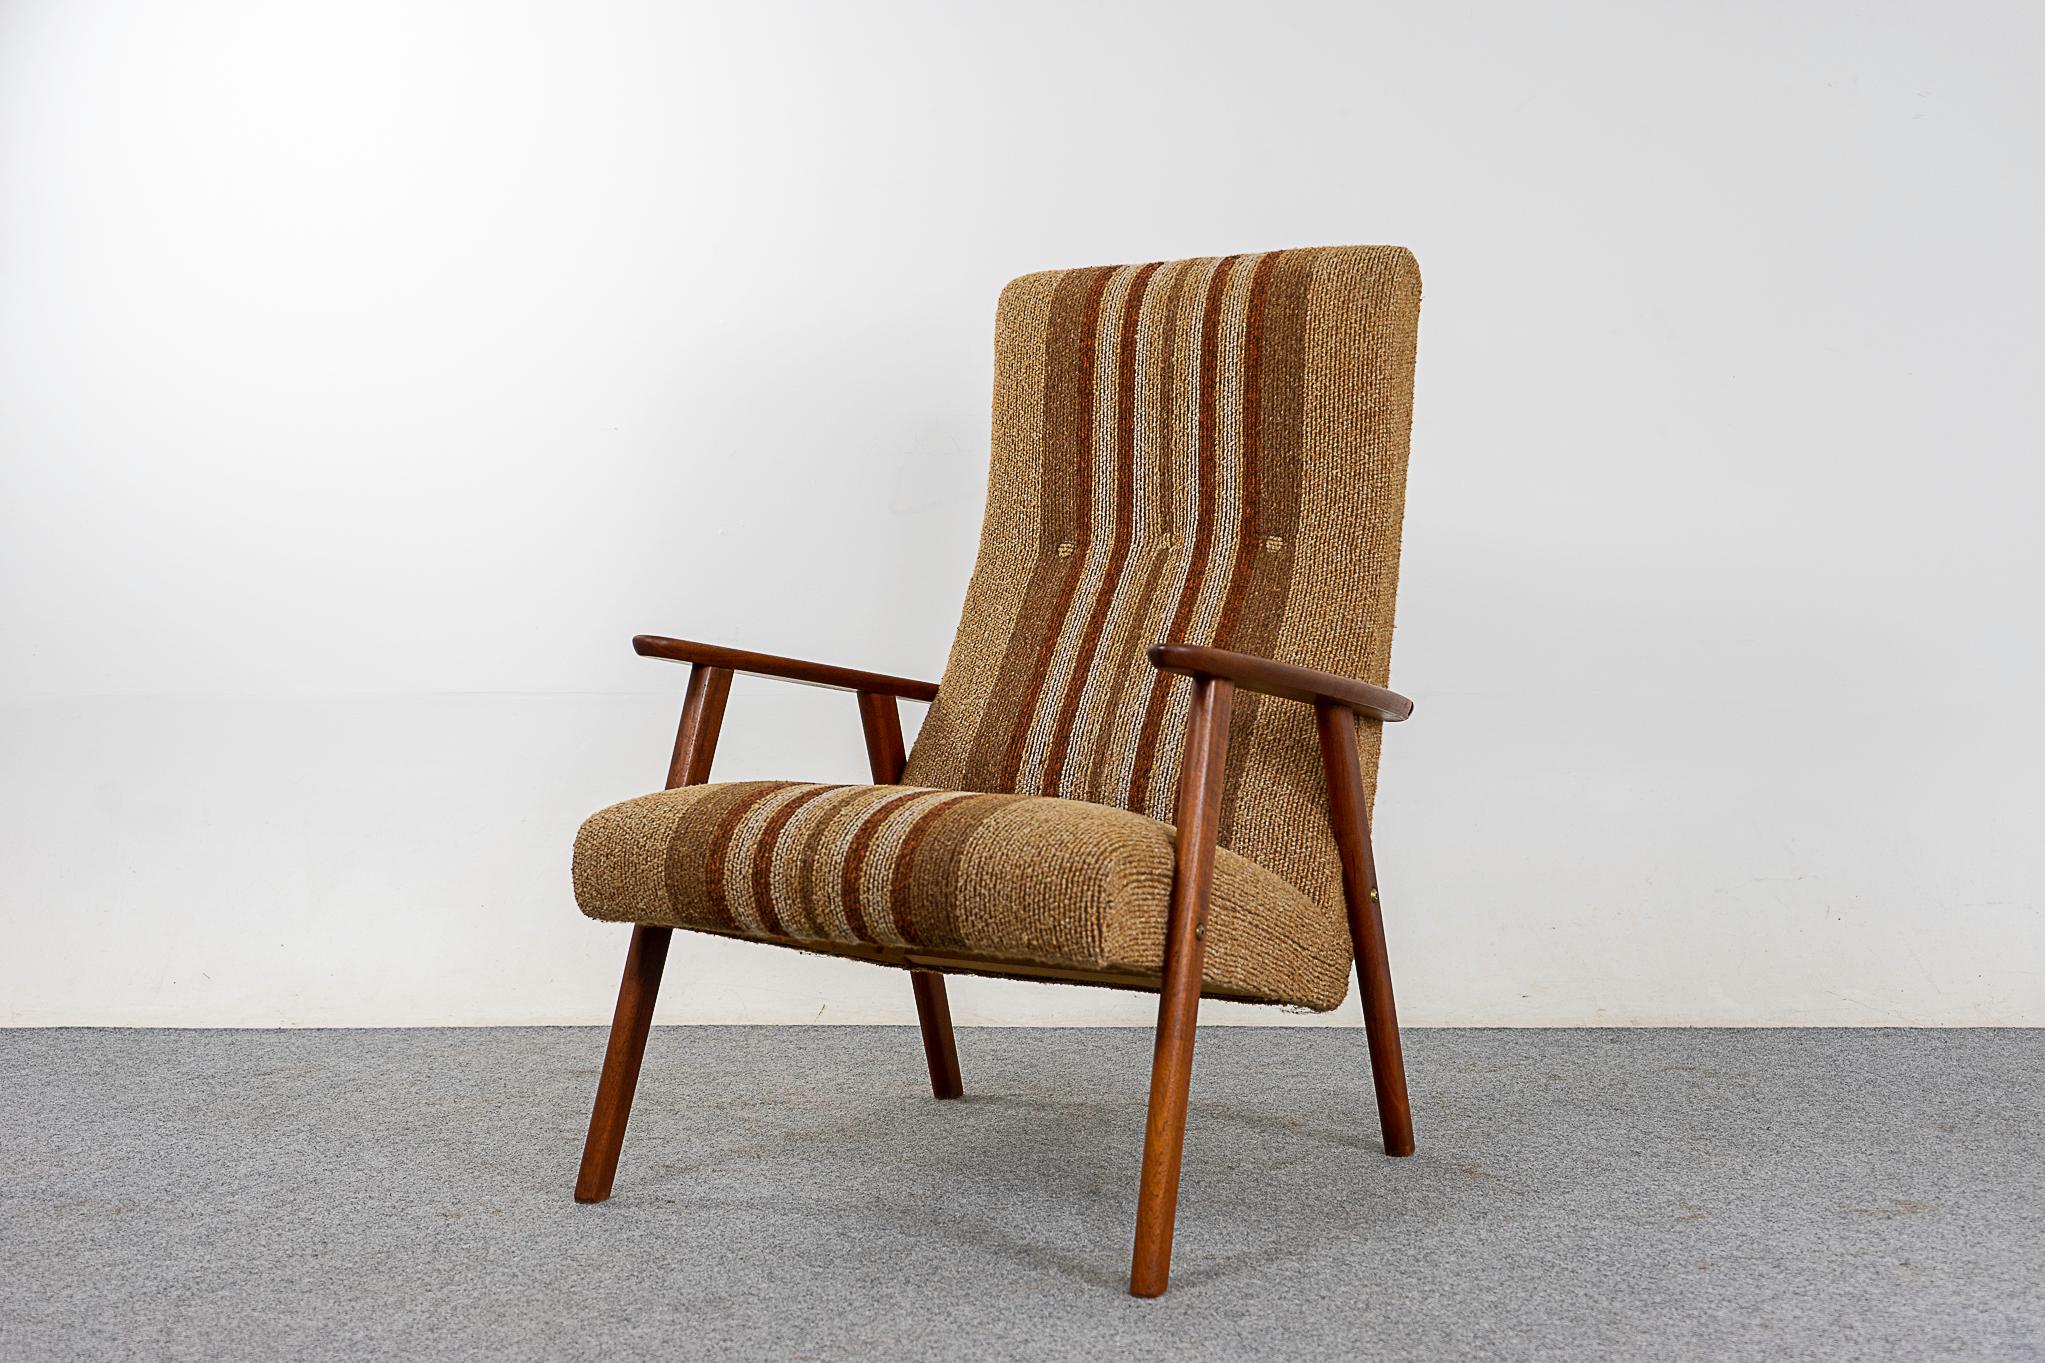 Teak Danish midcentury lounge chair, circa 1960s. High back provides ample support for your neck, a very comfortable sit! Original striped upholstery in nice condition. Settle in with a good book in this gorgeous lounger.